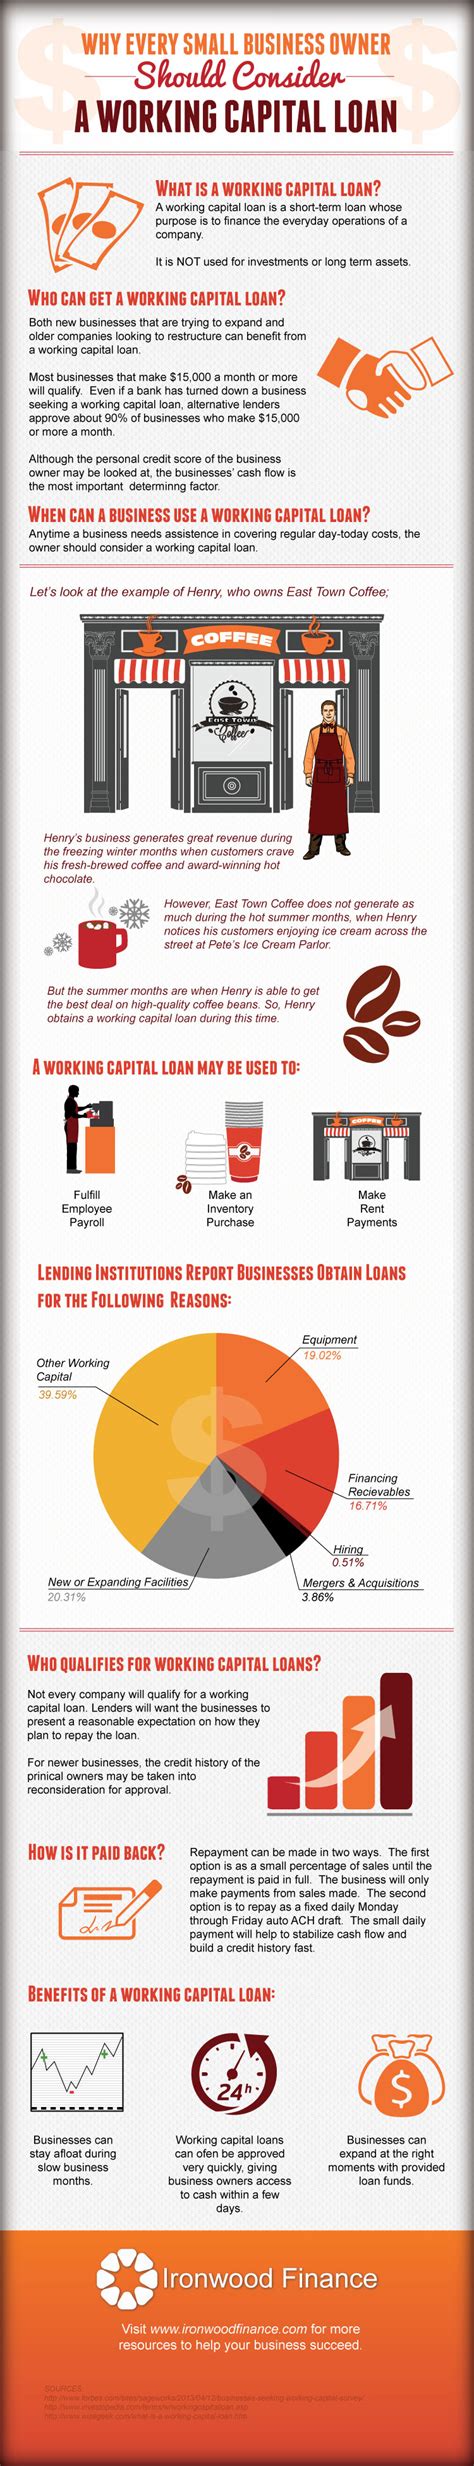 Working Capital Loans For Small Business Infographic